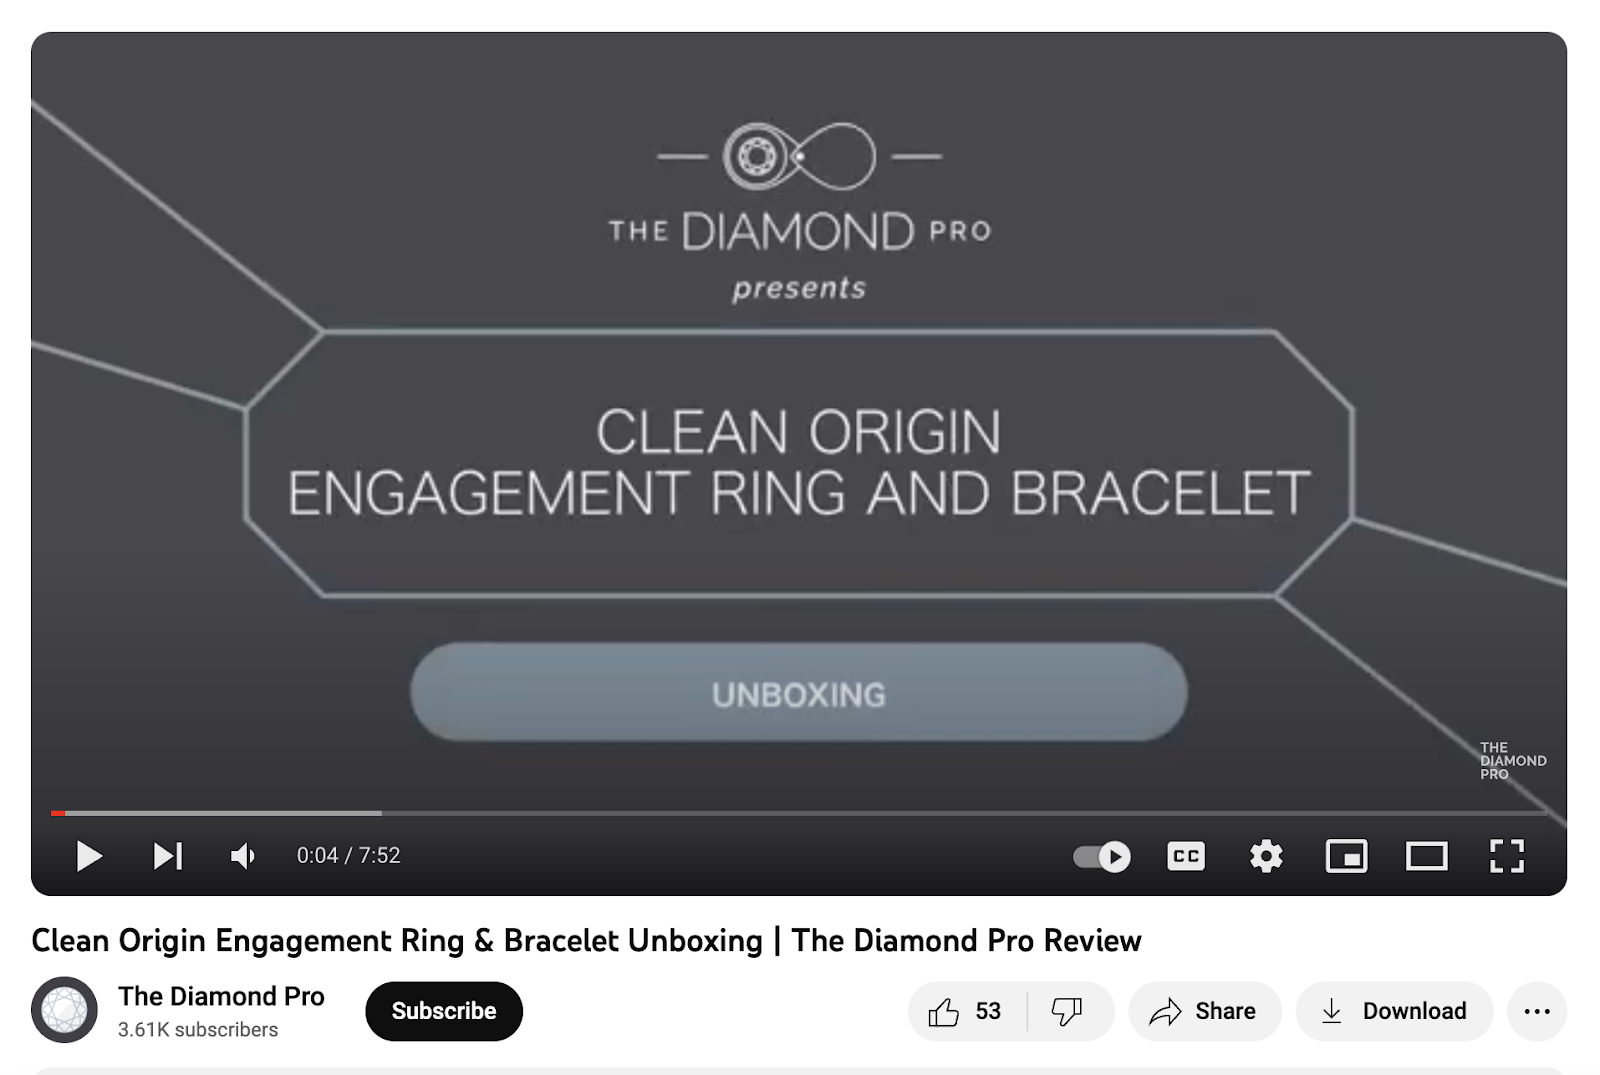 Screenshot of YouTube unboxing video for Clean Origin engagement ring and bracelet